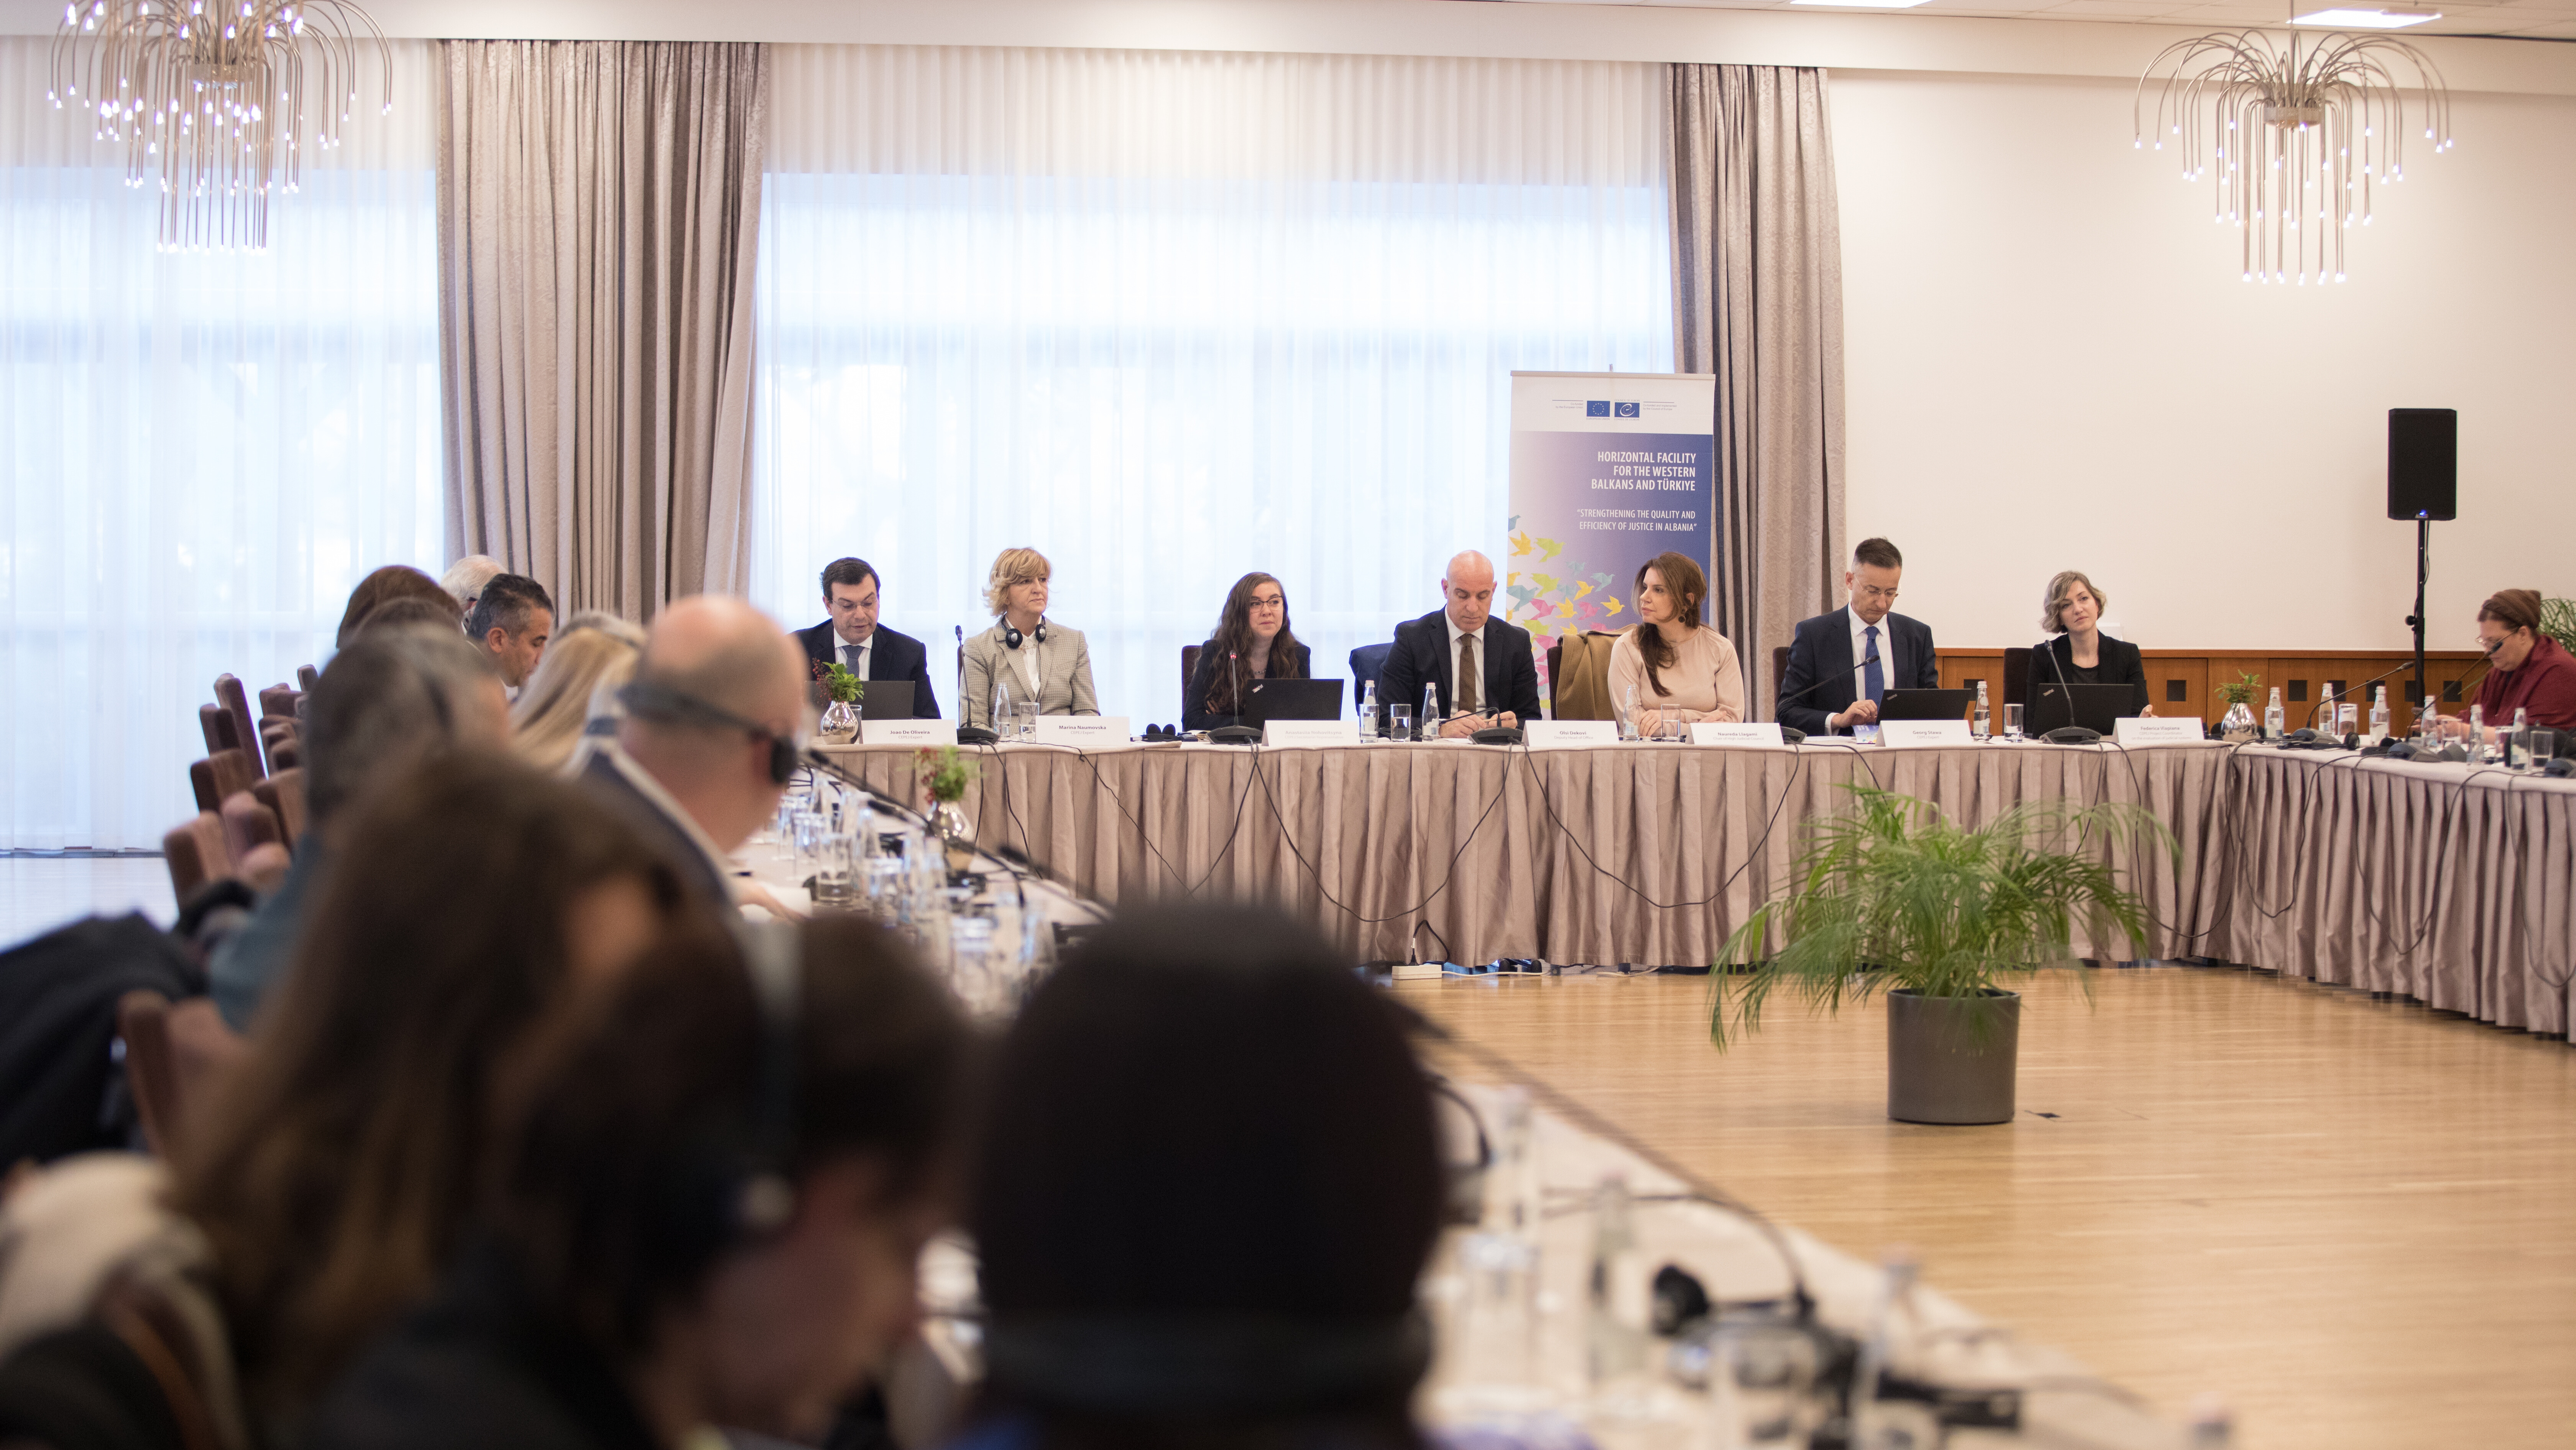 The CEPEJ organizes a workshop for Albanian court councils on its tools aimed at improving the efficiency and quality of justice